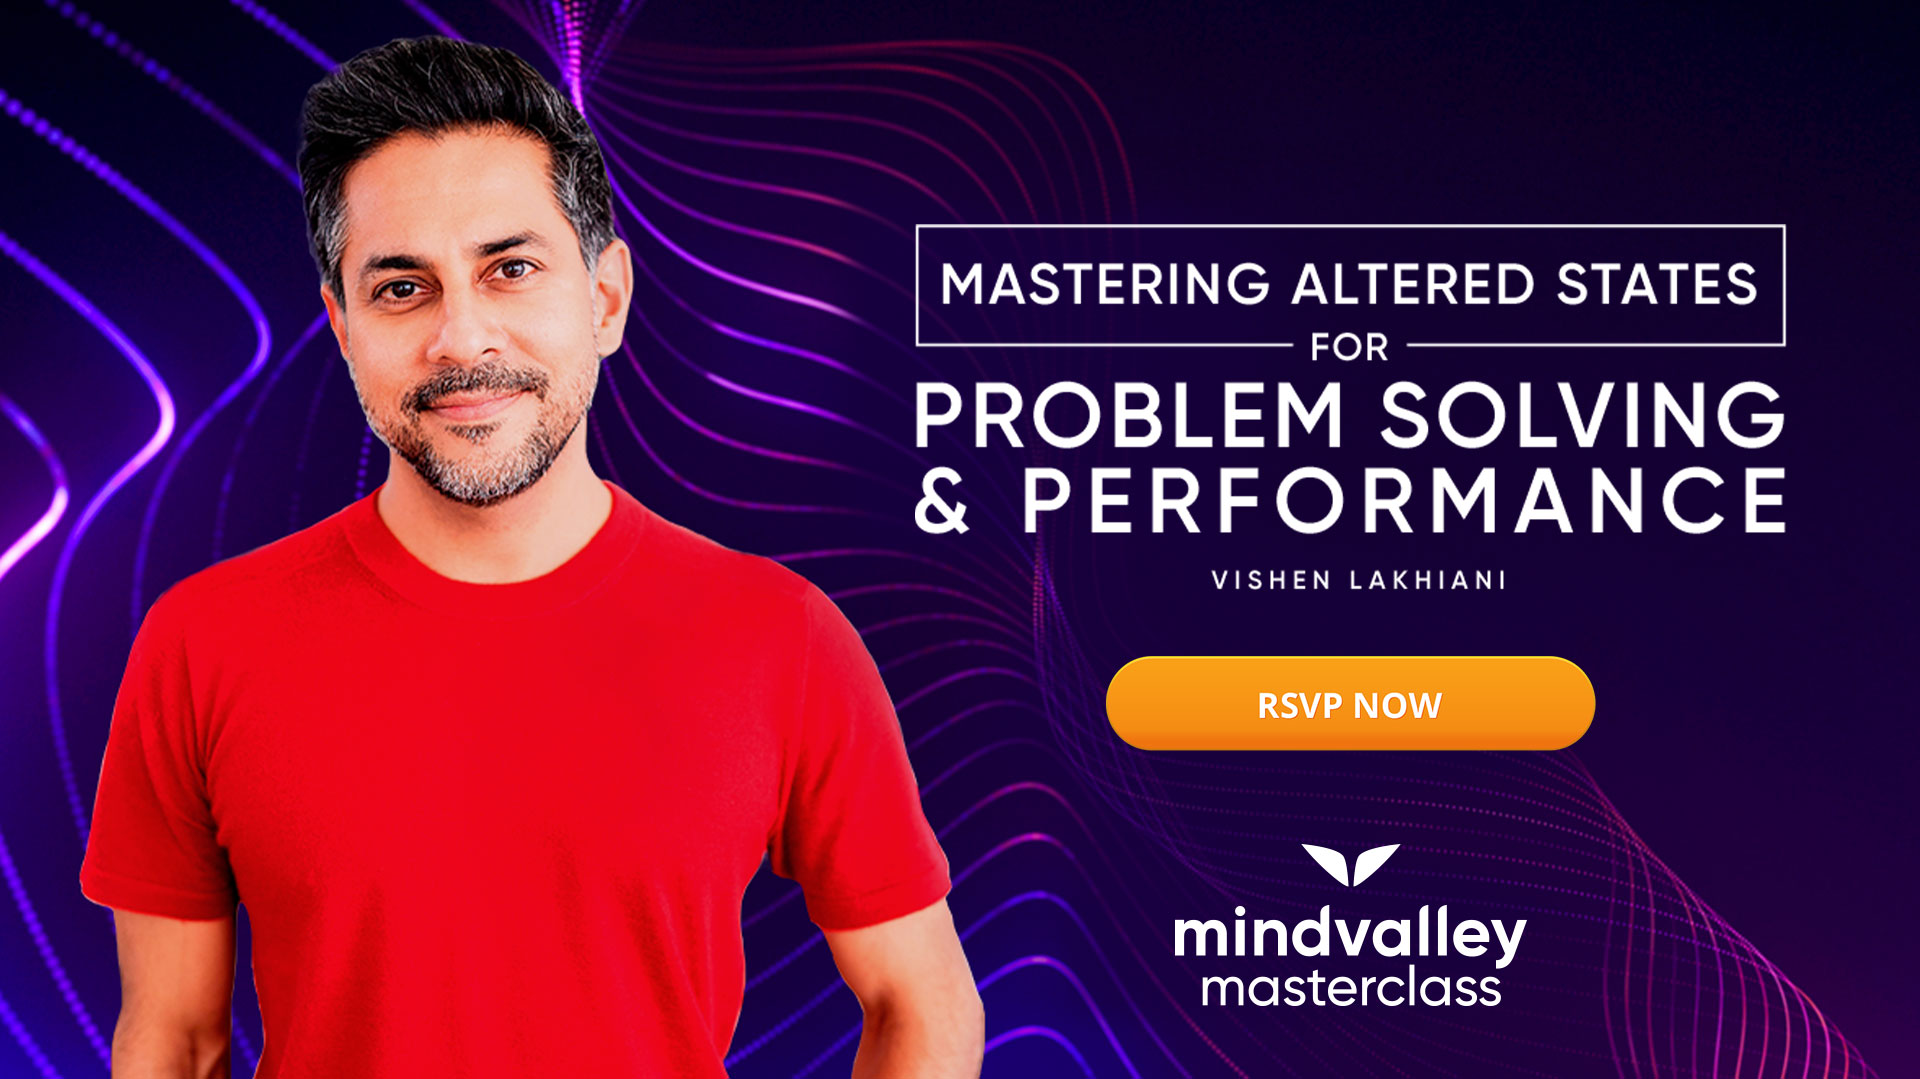 Try the FREE Masterclass first